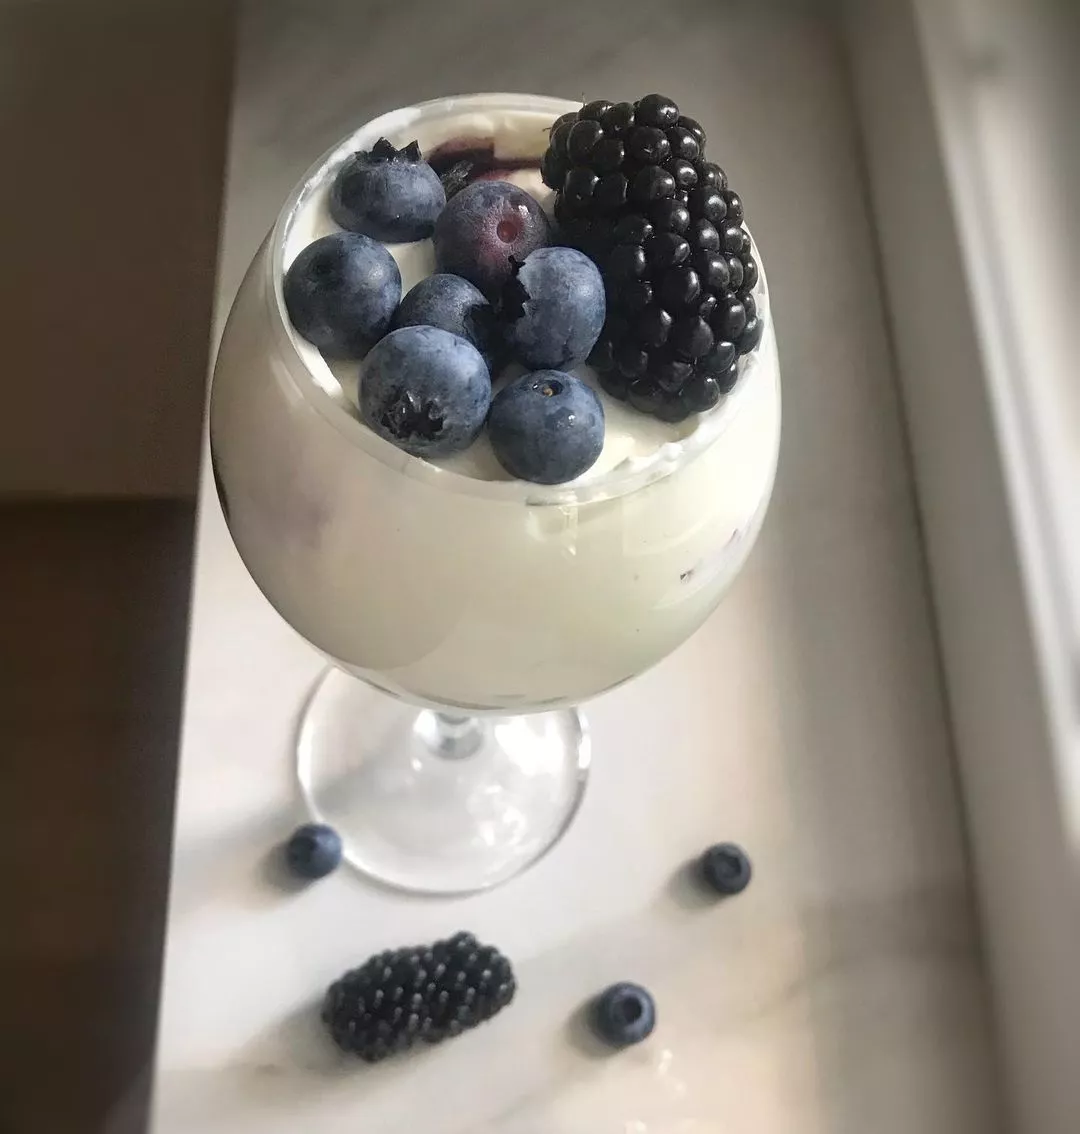 Curd cream with berries